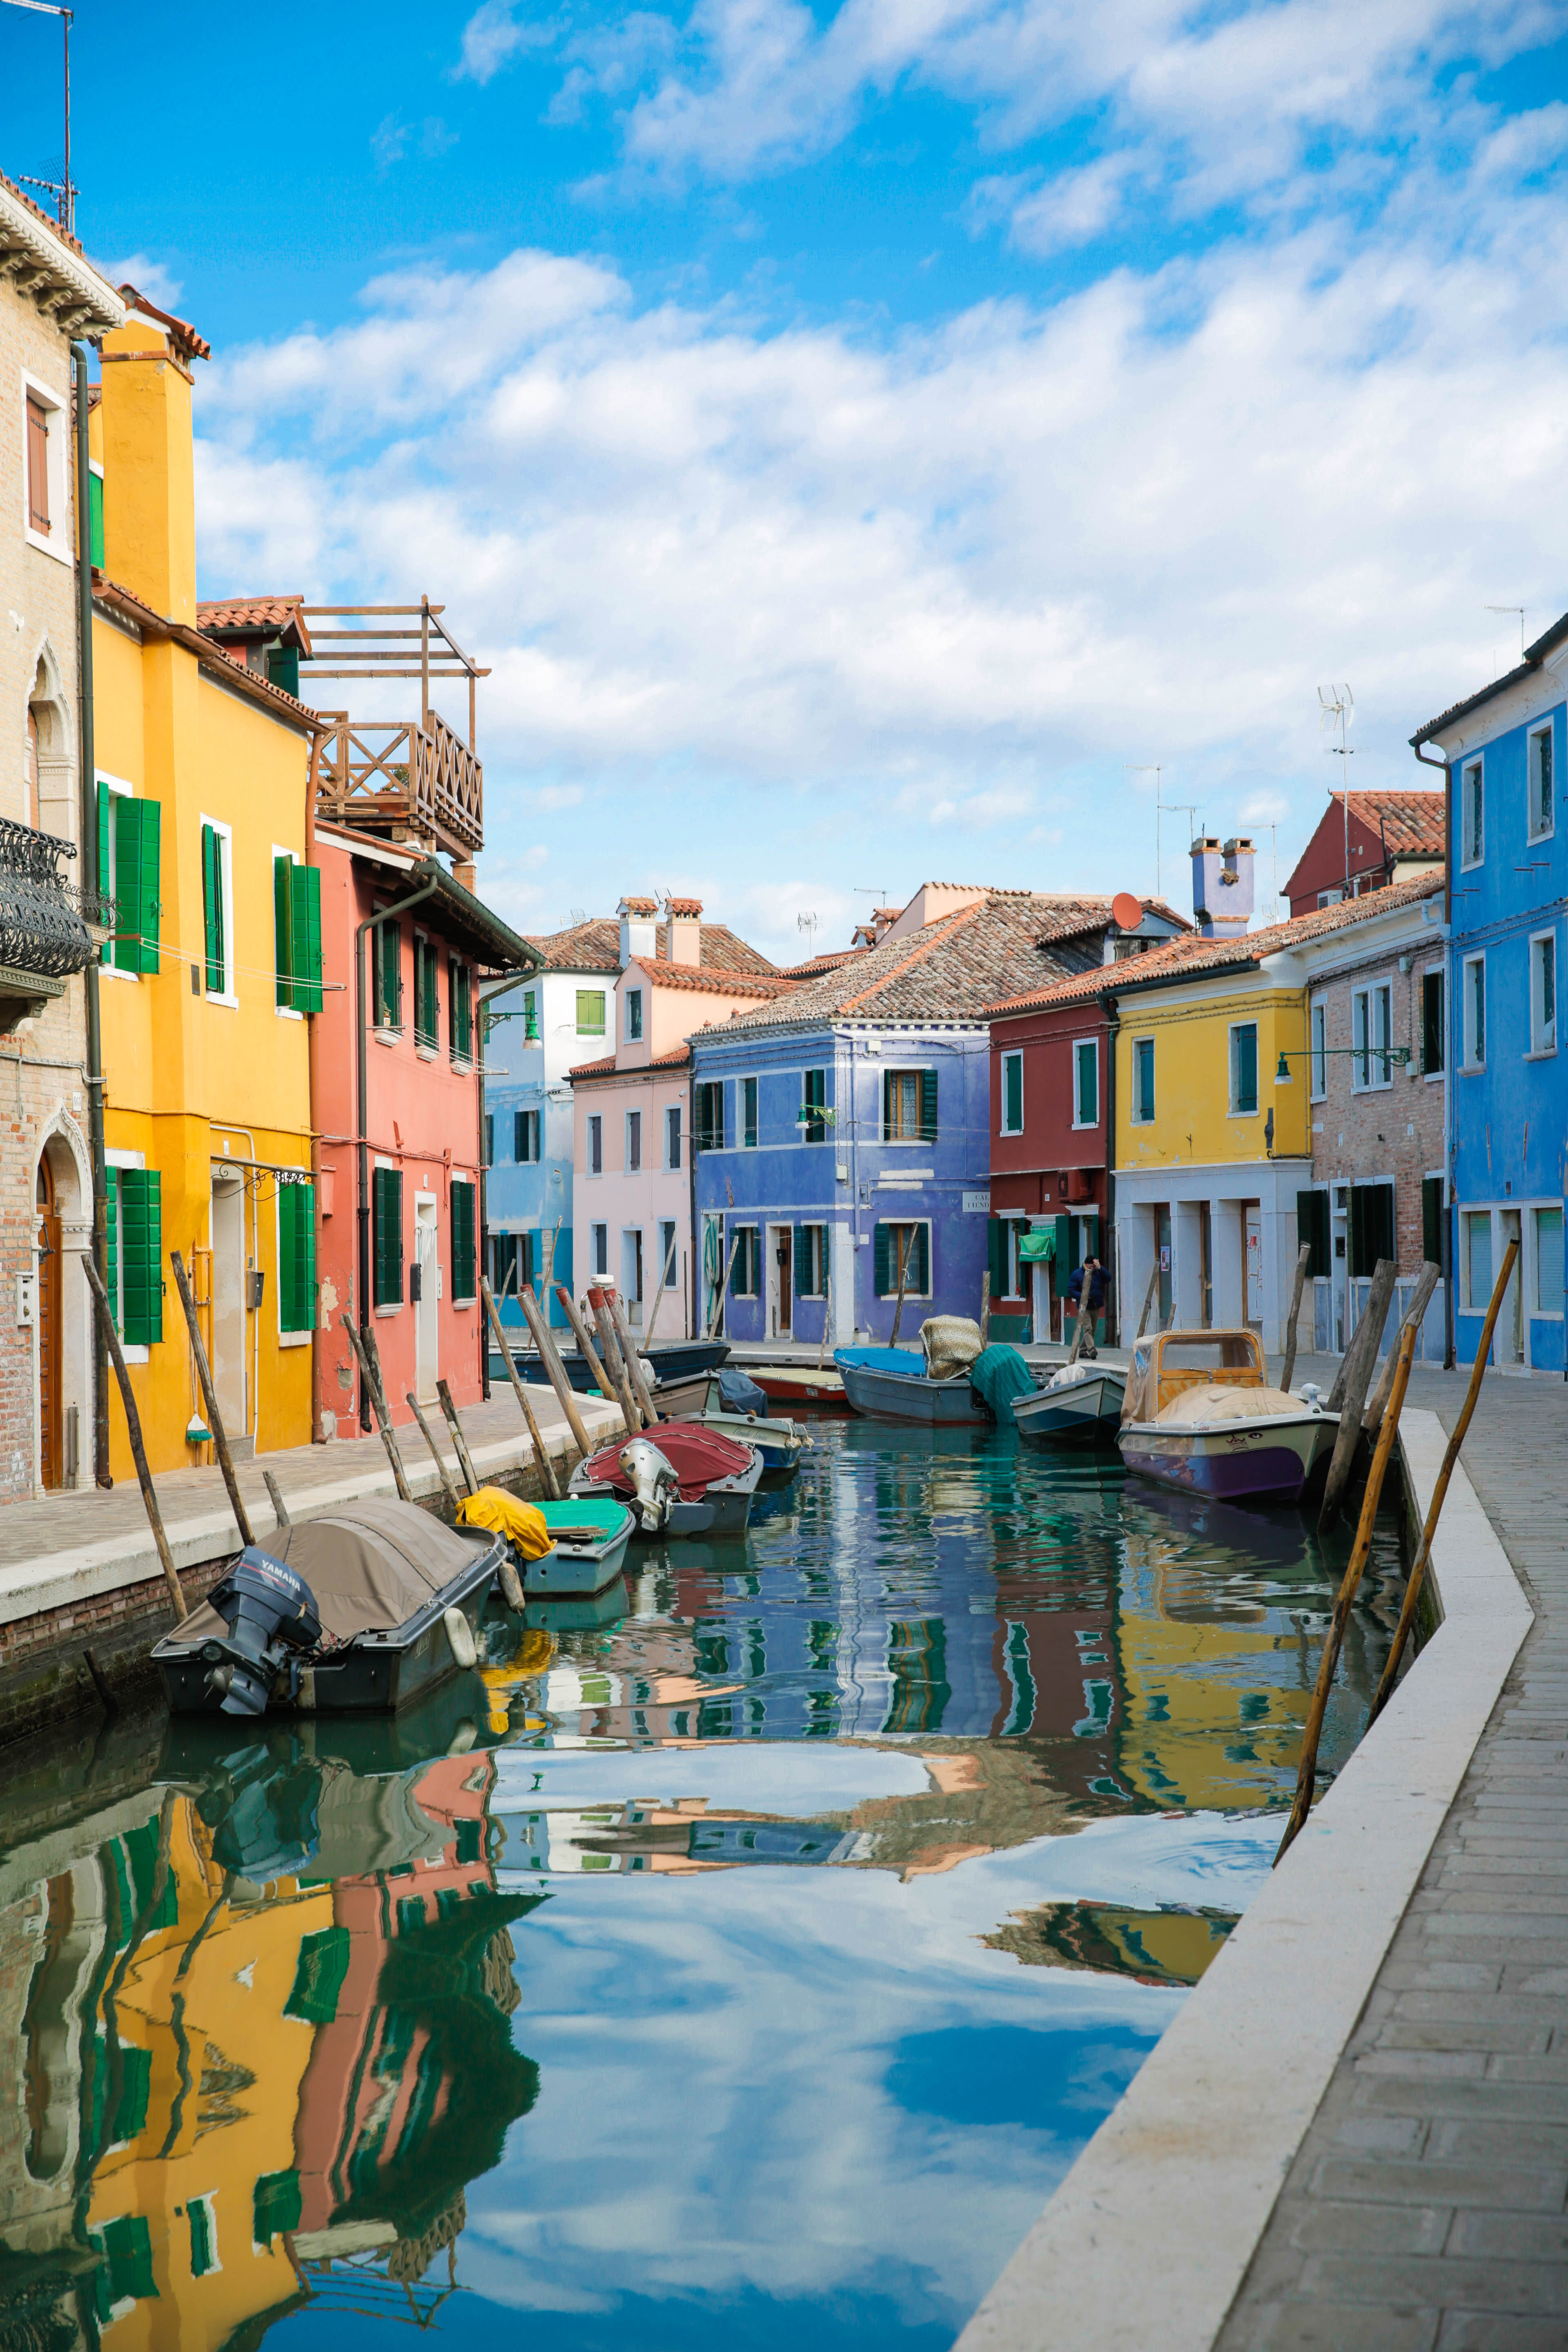 20 pictures to convince you to go to Burano, Italy